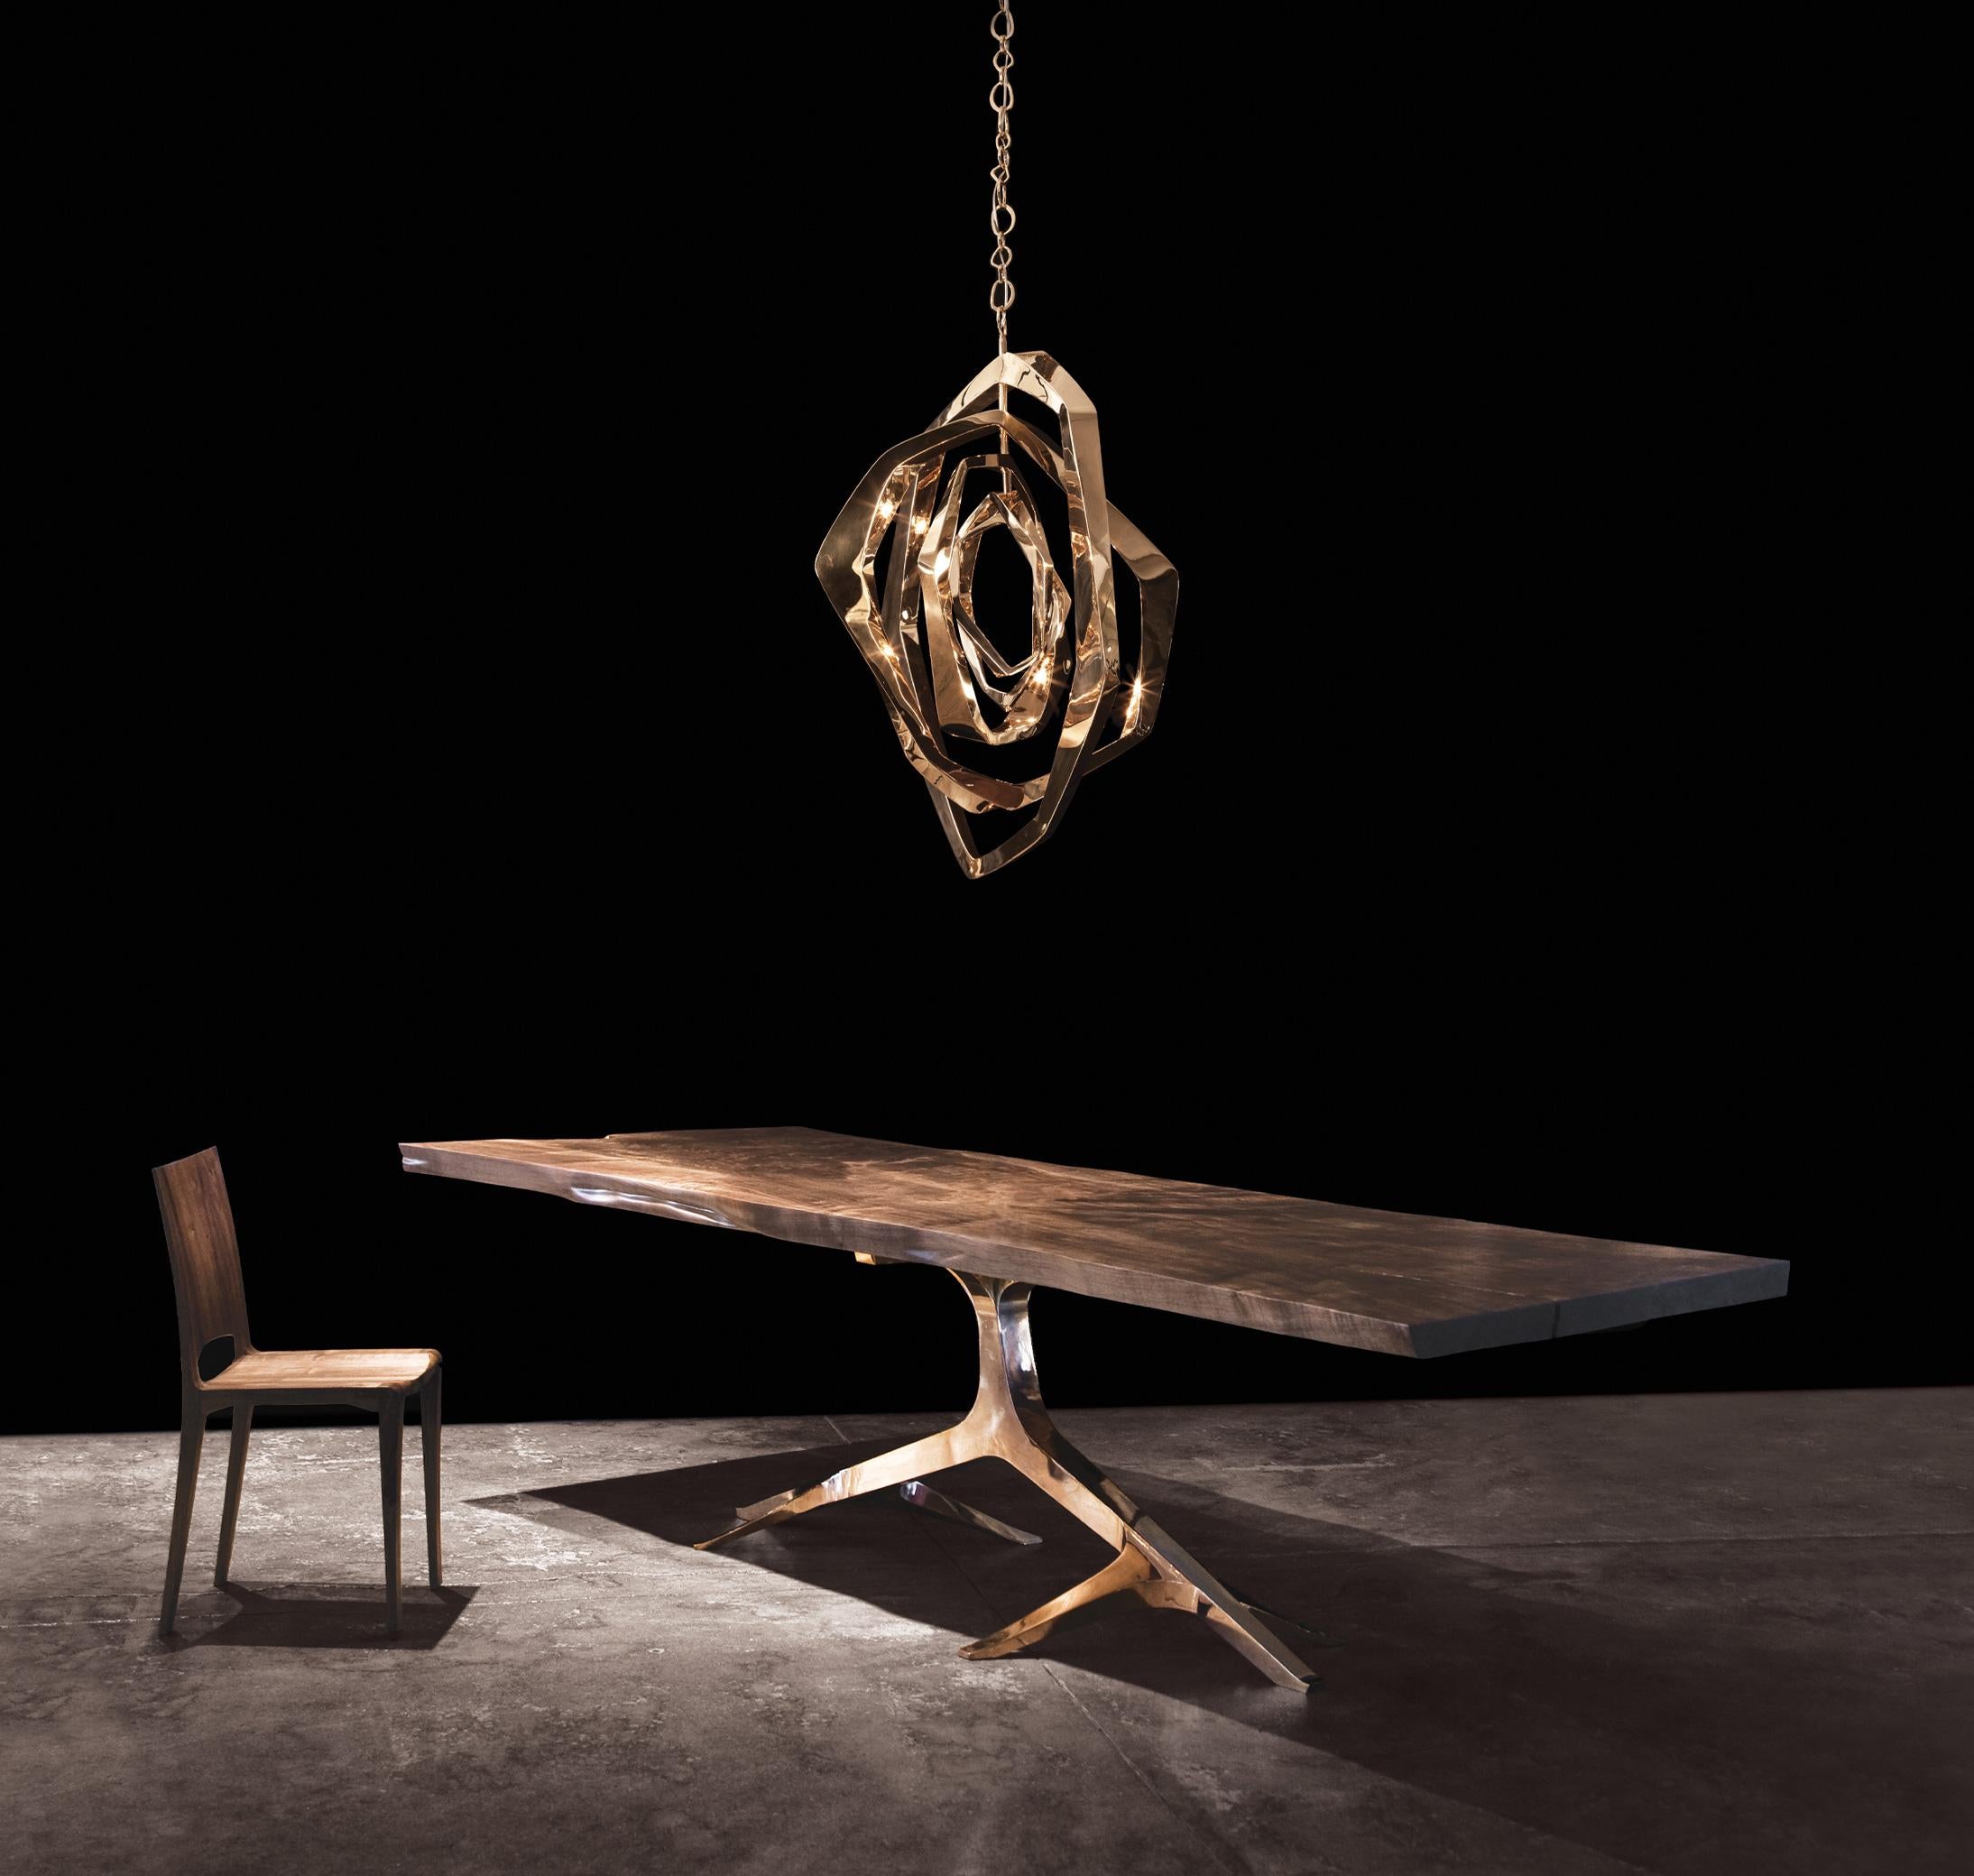 The beautiful Rose Base Dining Table by Barlas Baylar constitutes an ornate Bronze or Stainless Steel base which dances elegantly with the live, organic edges of the Live Edge top.  This solid-slab, Live Edge Walnut top is created from old growth